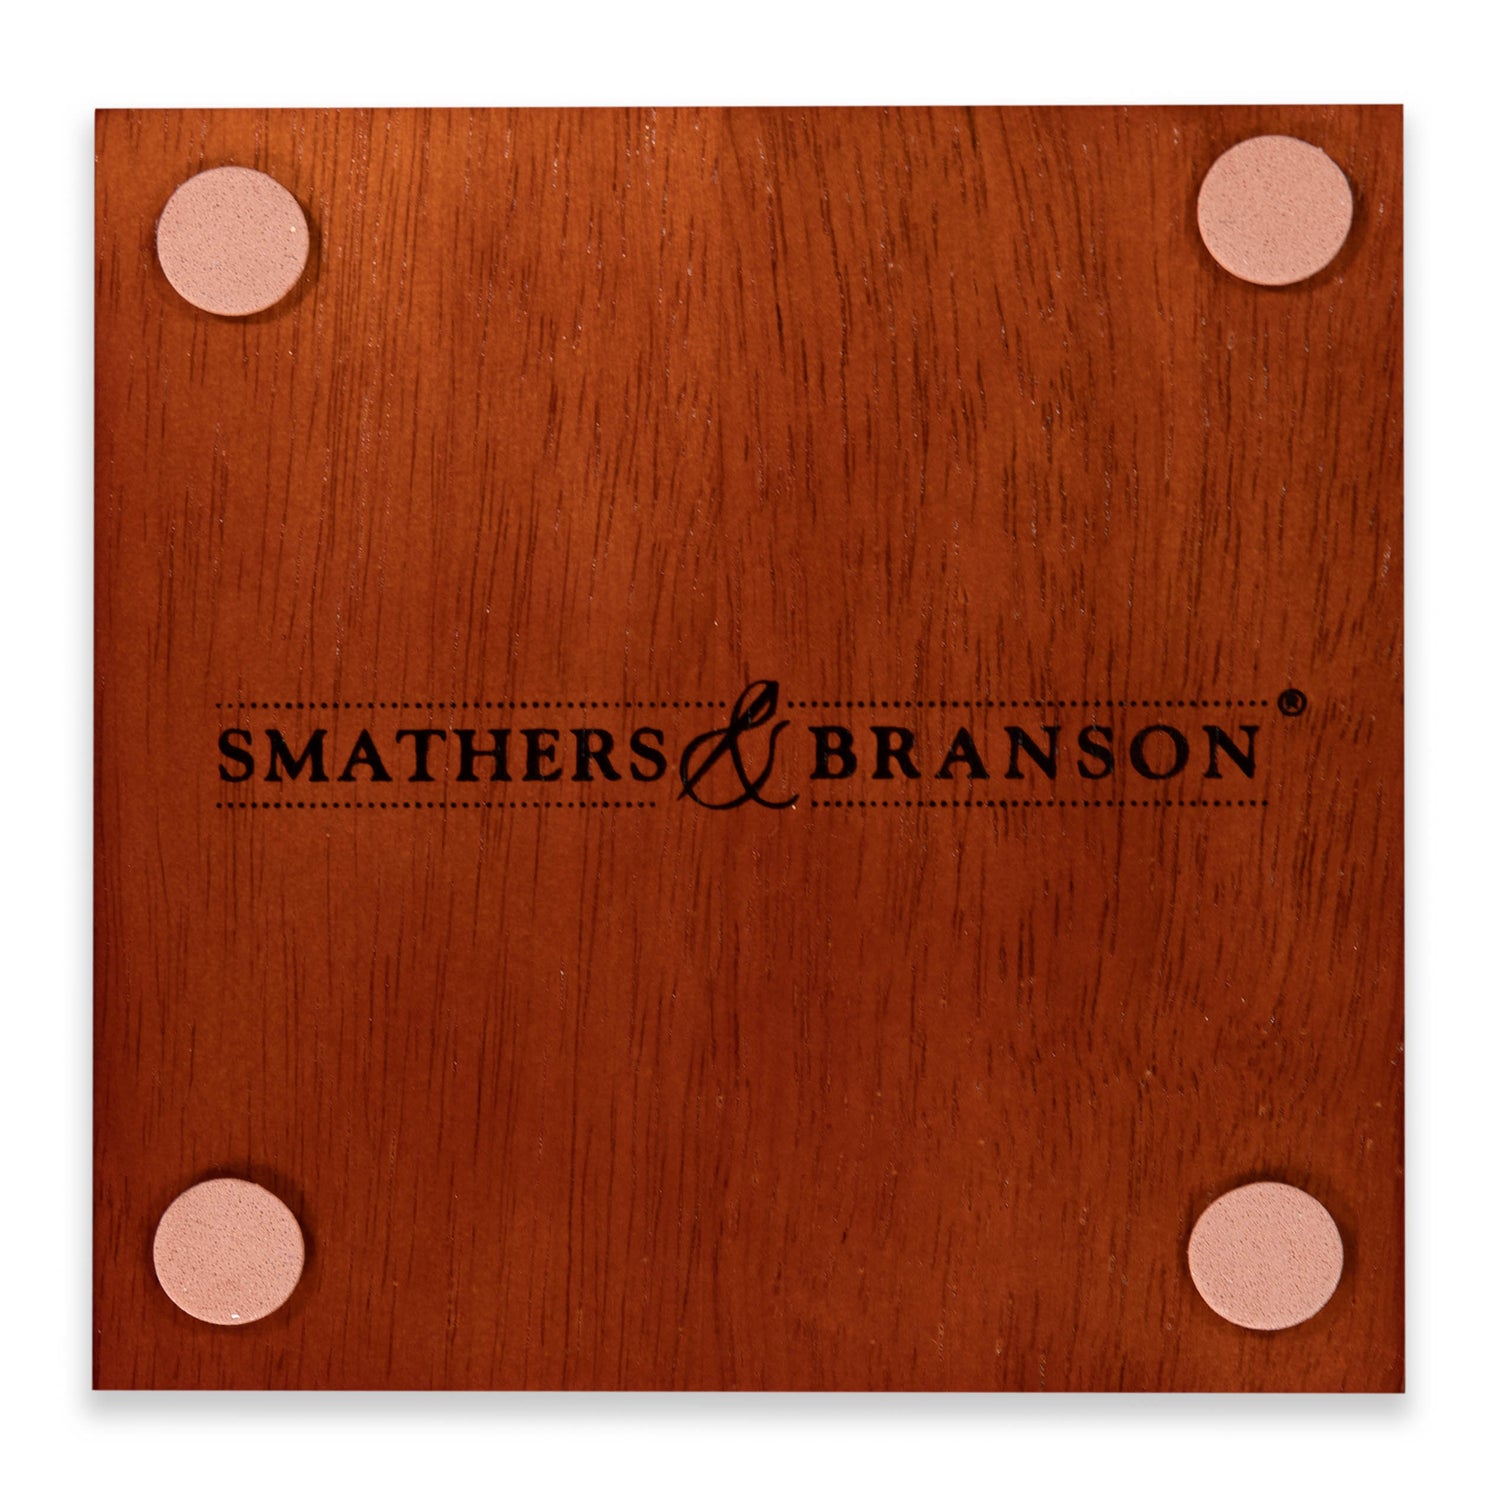 Smathers & Branson Sec Stitched Wooden Coasters